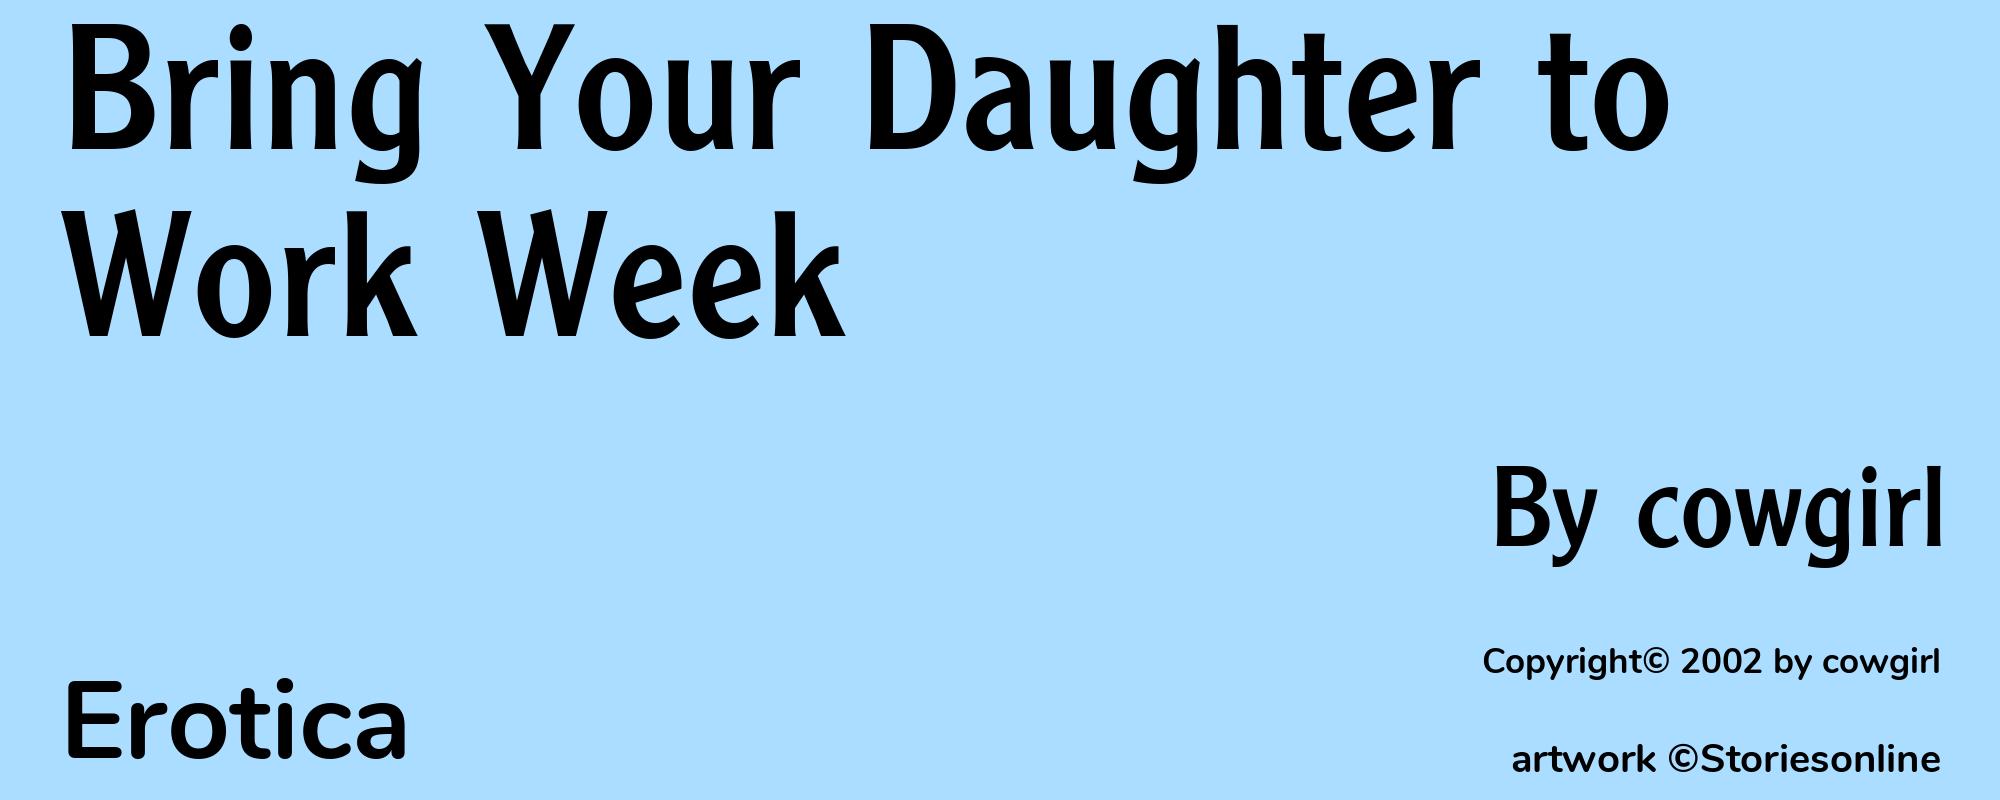 Bring Your Daughter to Work Week - Cover